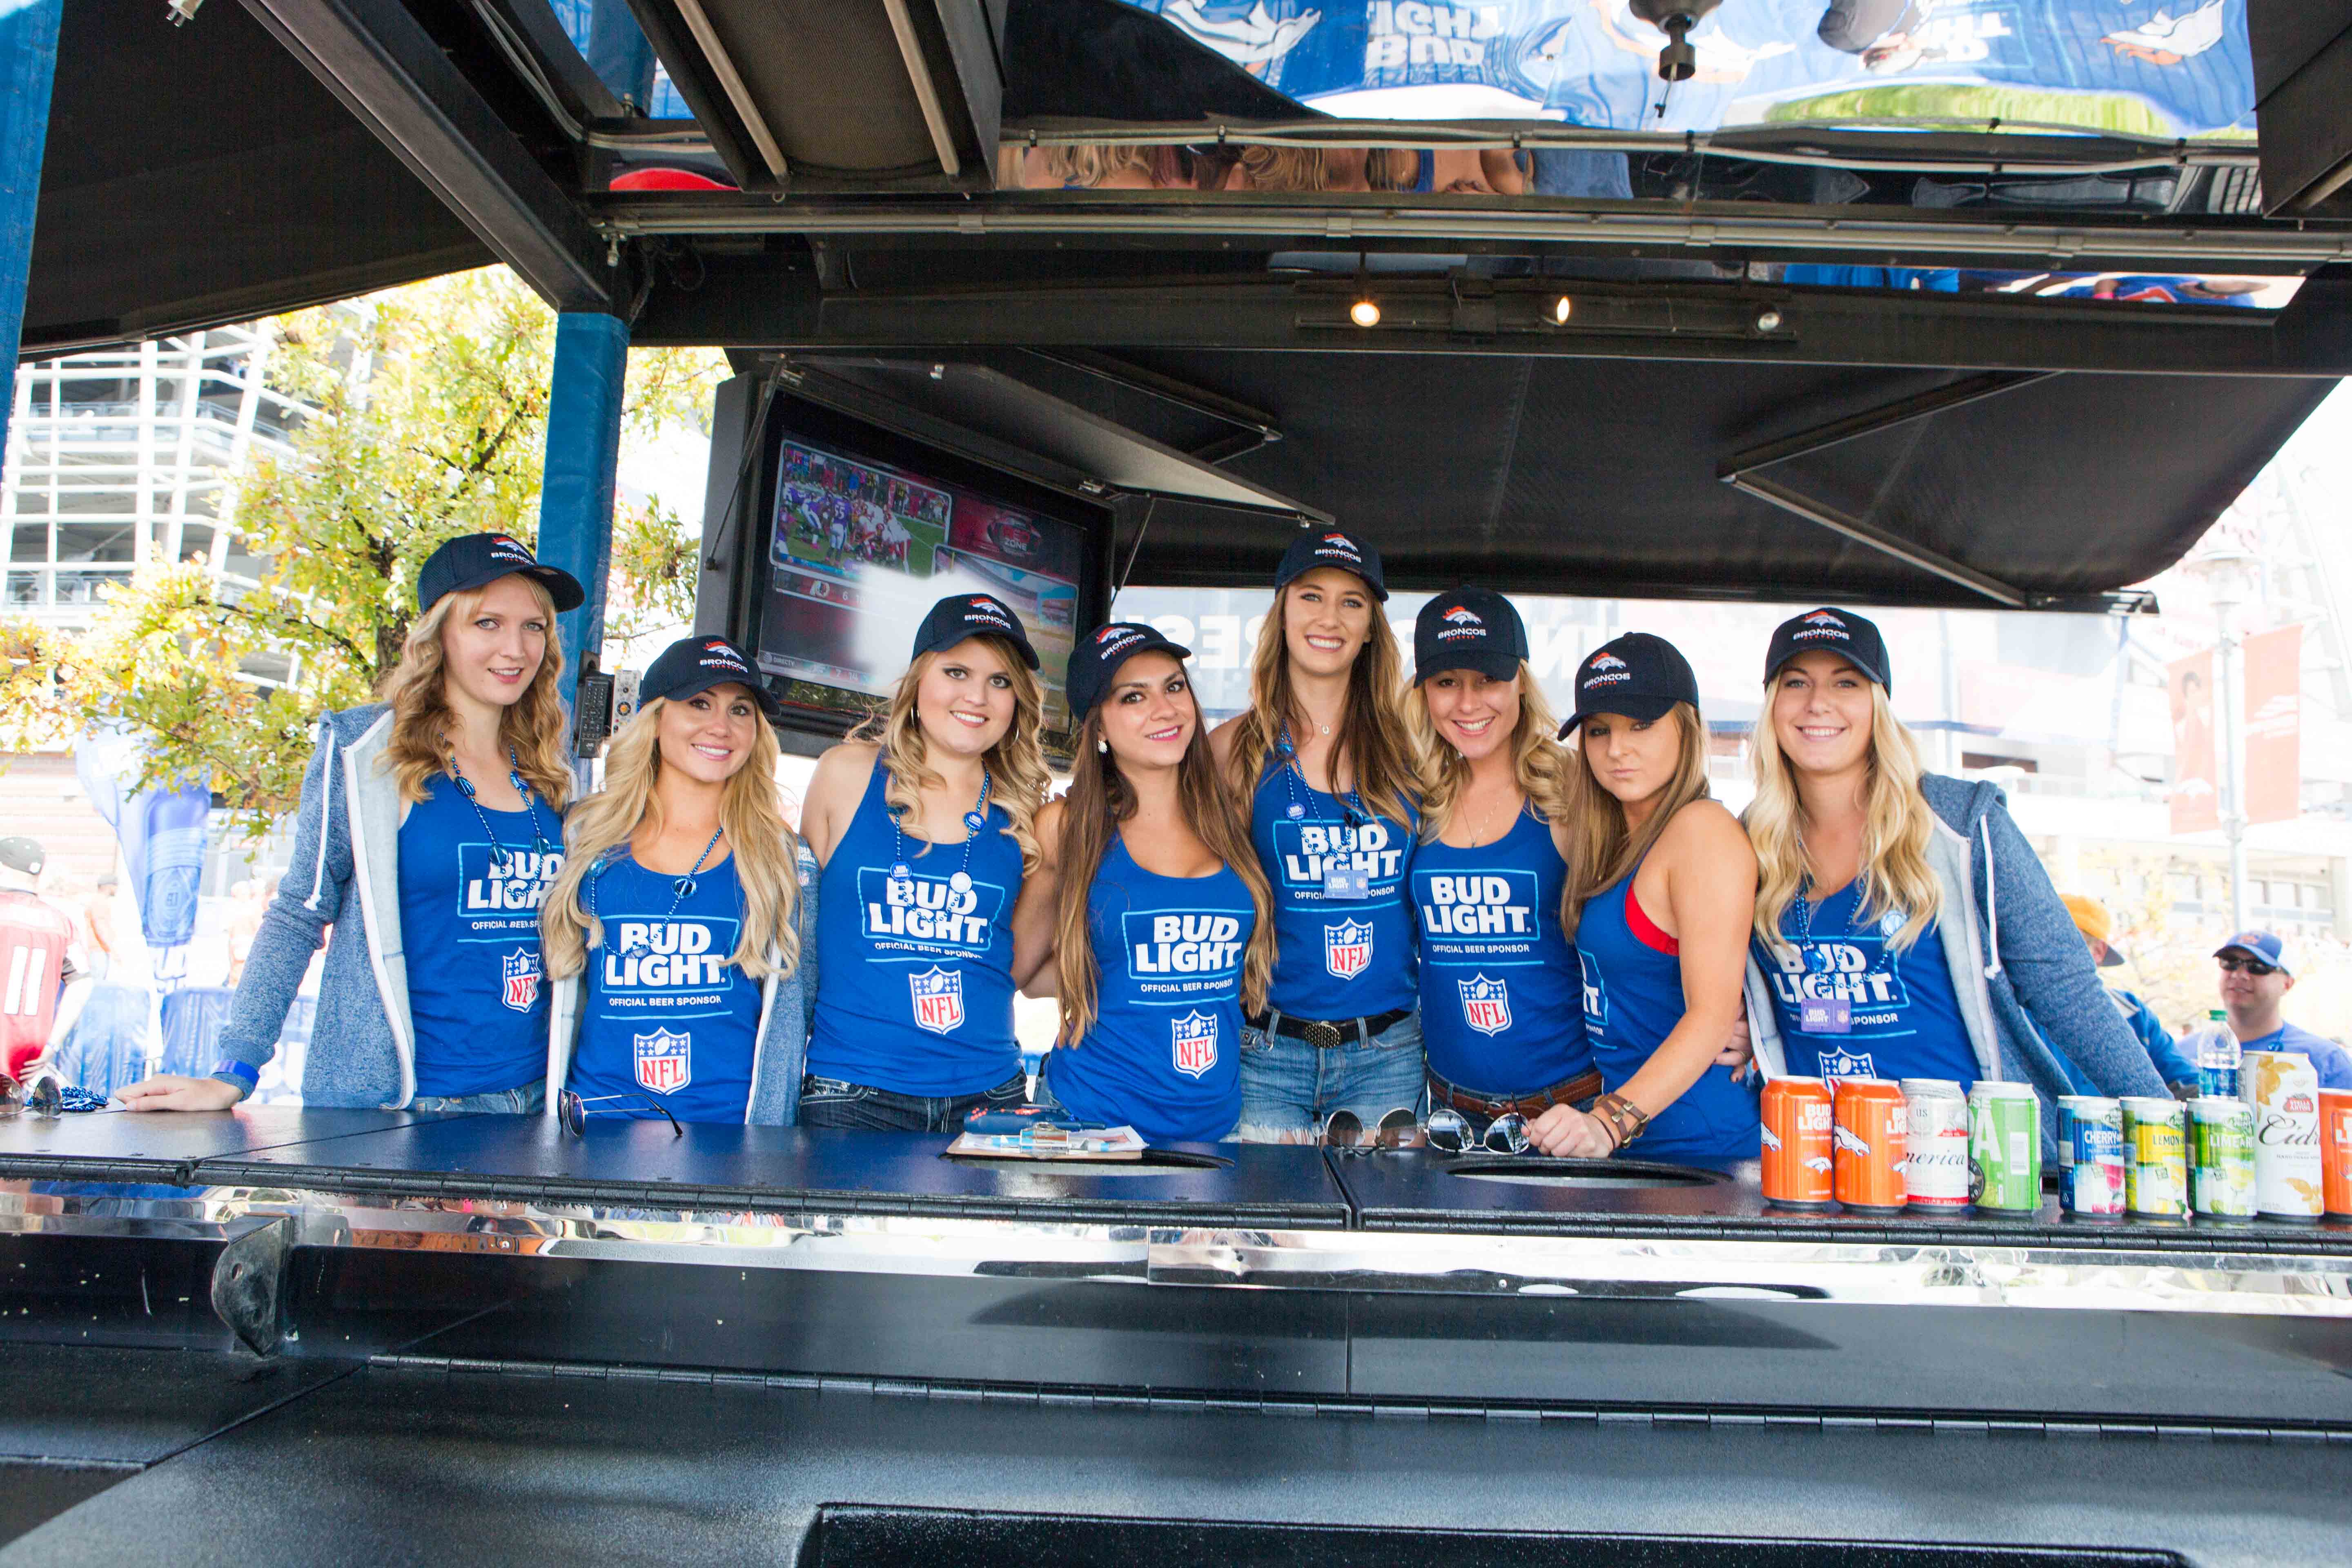 We could not forget the Bud Light babes. Even though they are not wearing orange.